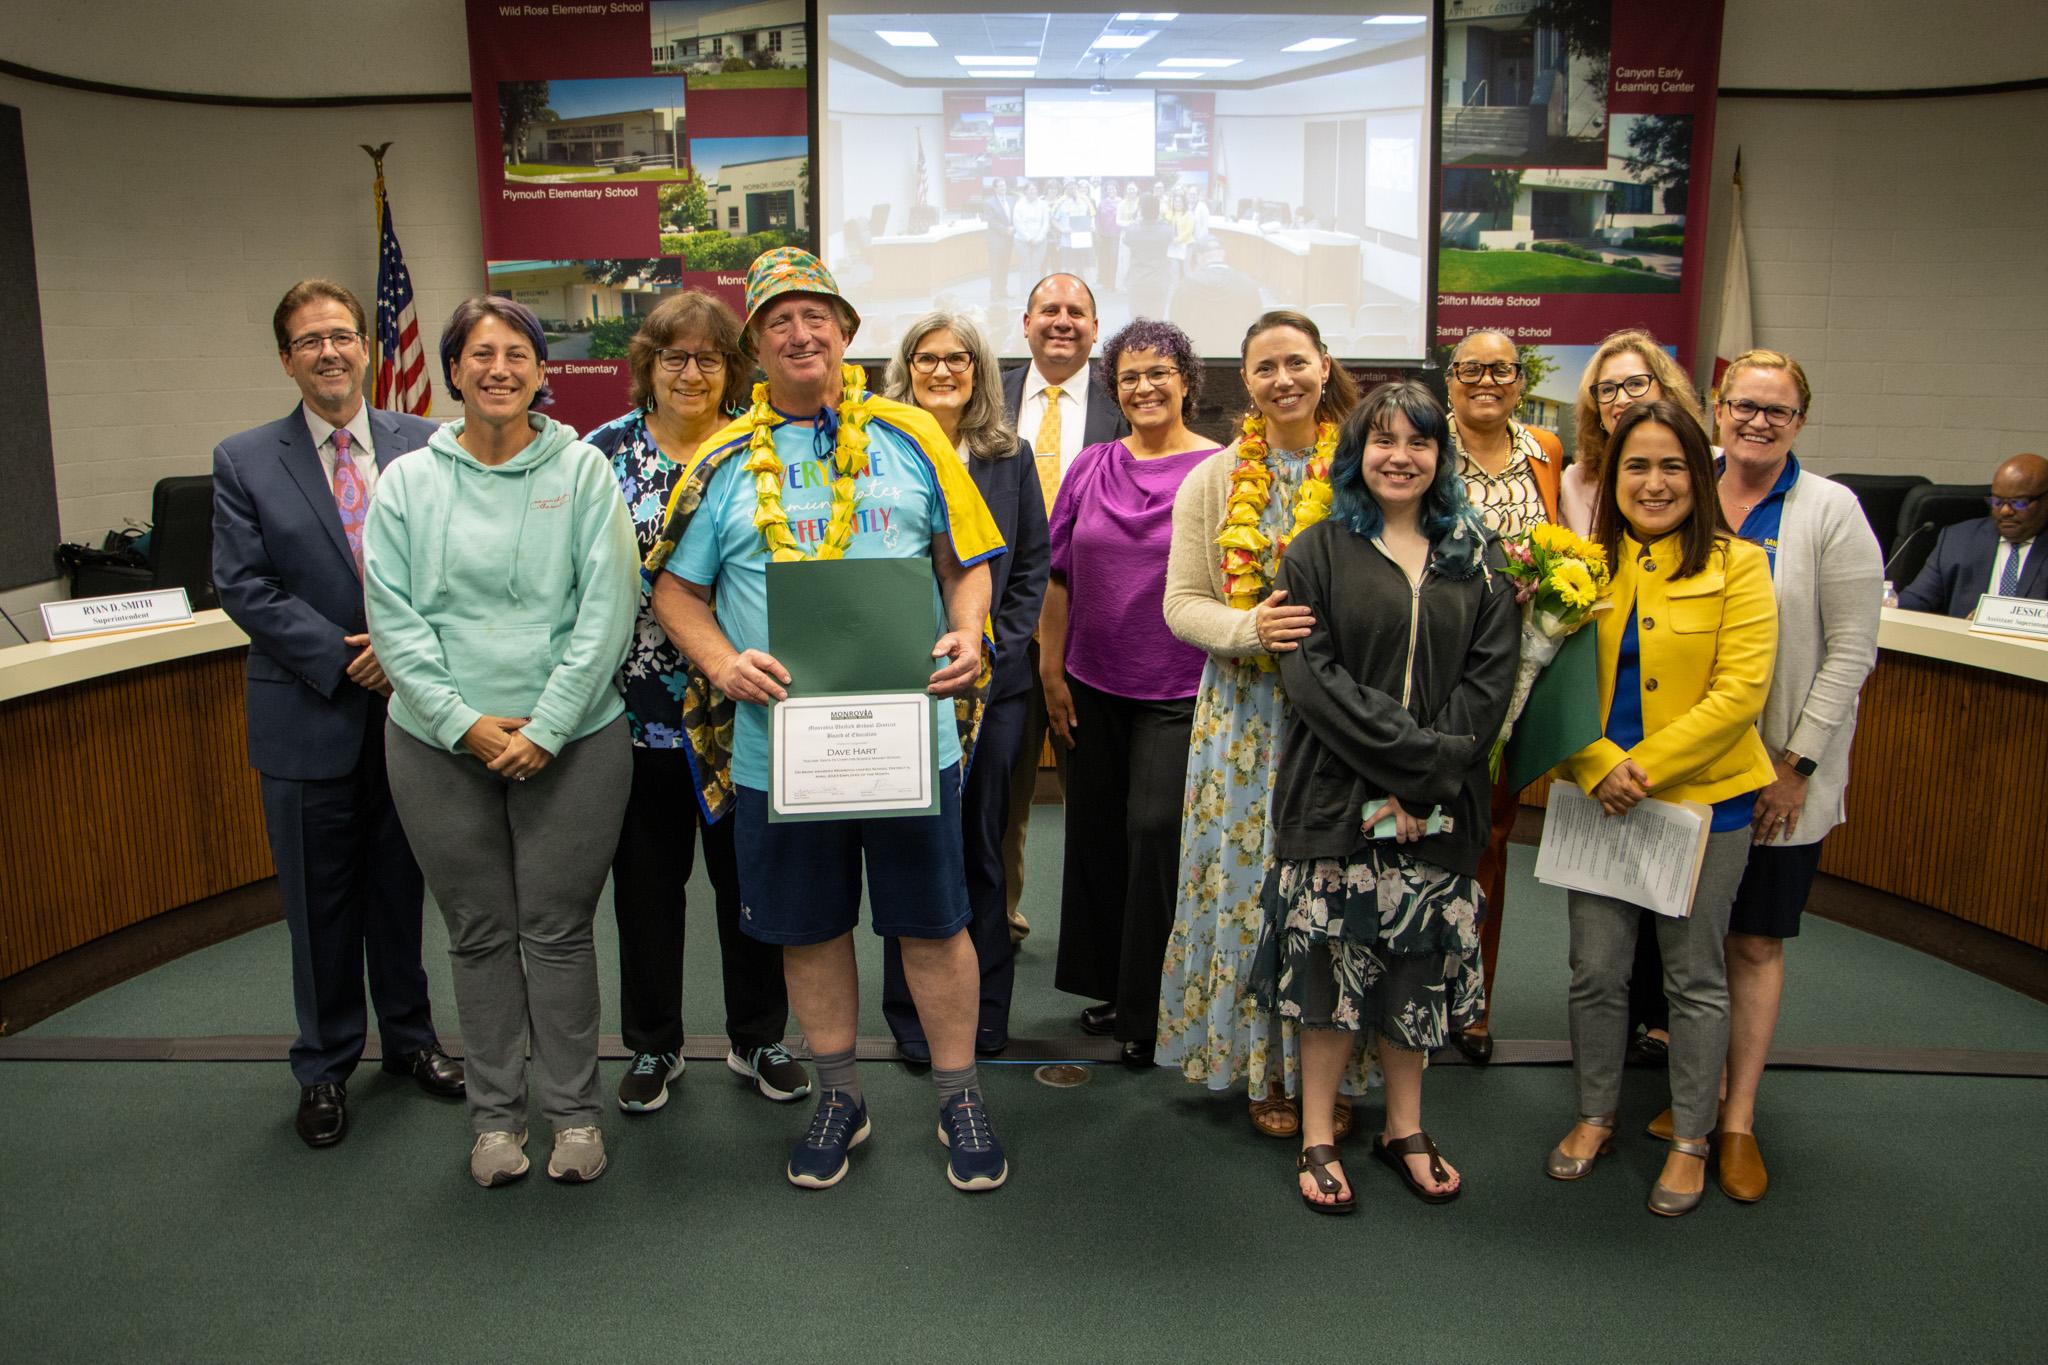 The Board of Education & the Monrovia Chamber of Commerce congratulated employees on being recipients of Monrovia Unified School District's "Employees of the Month" for April.